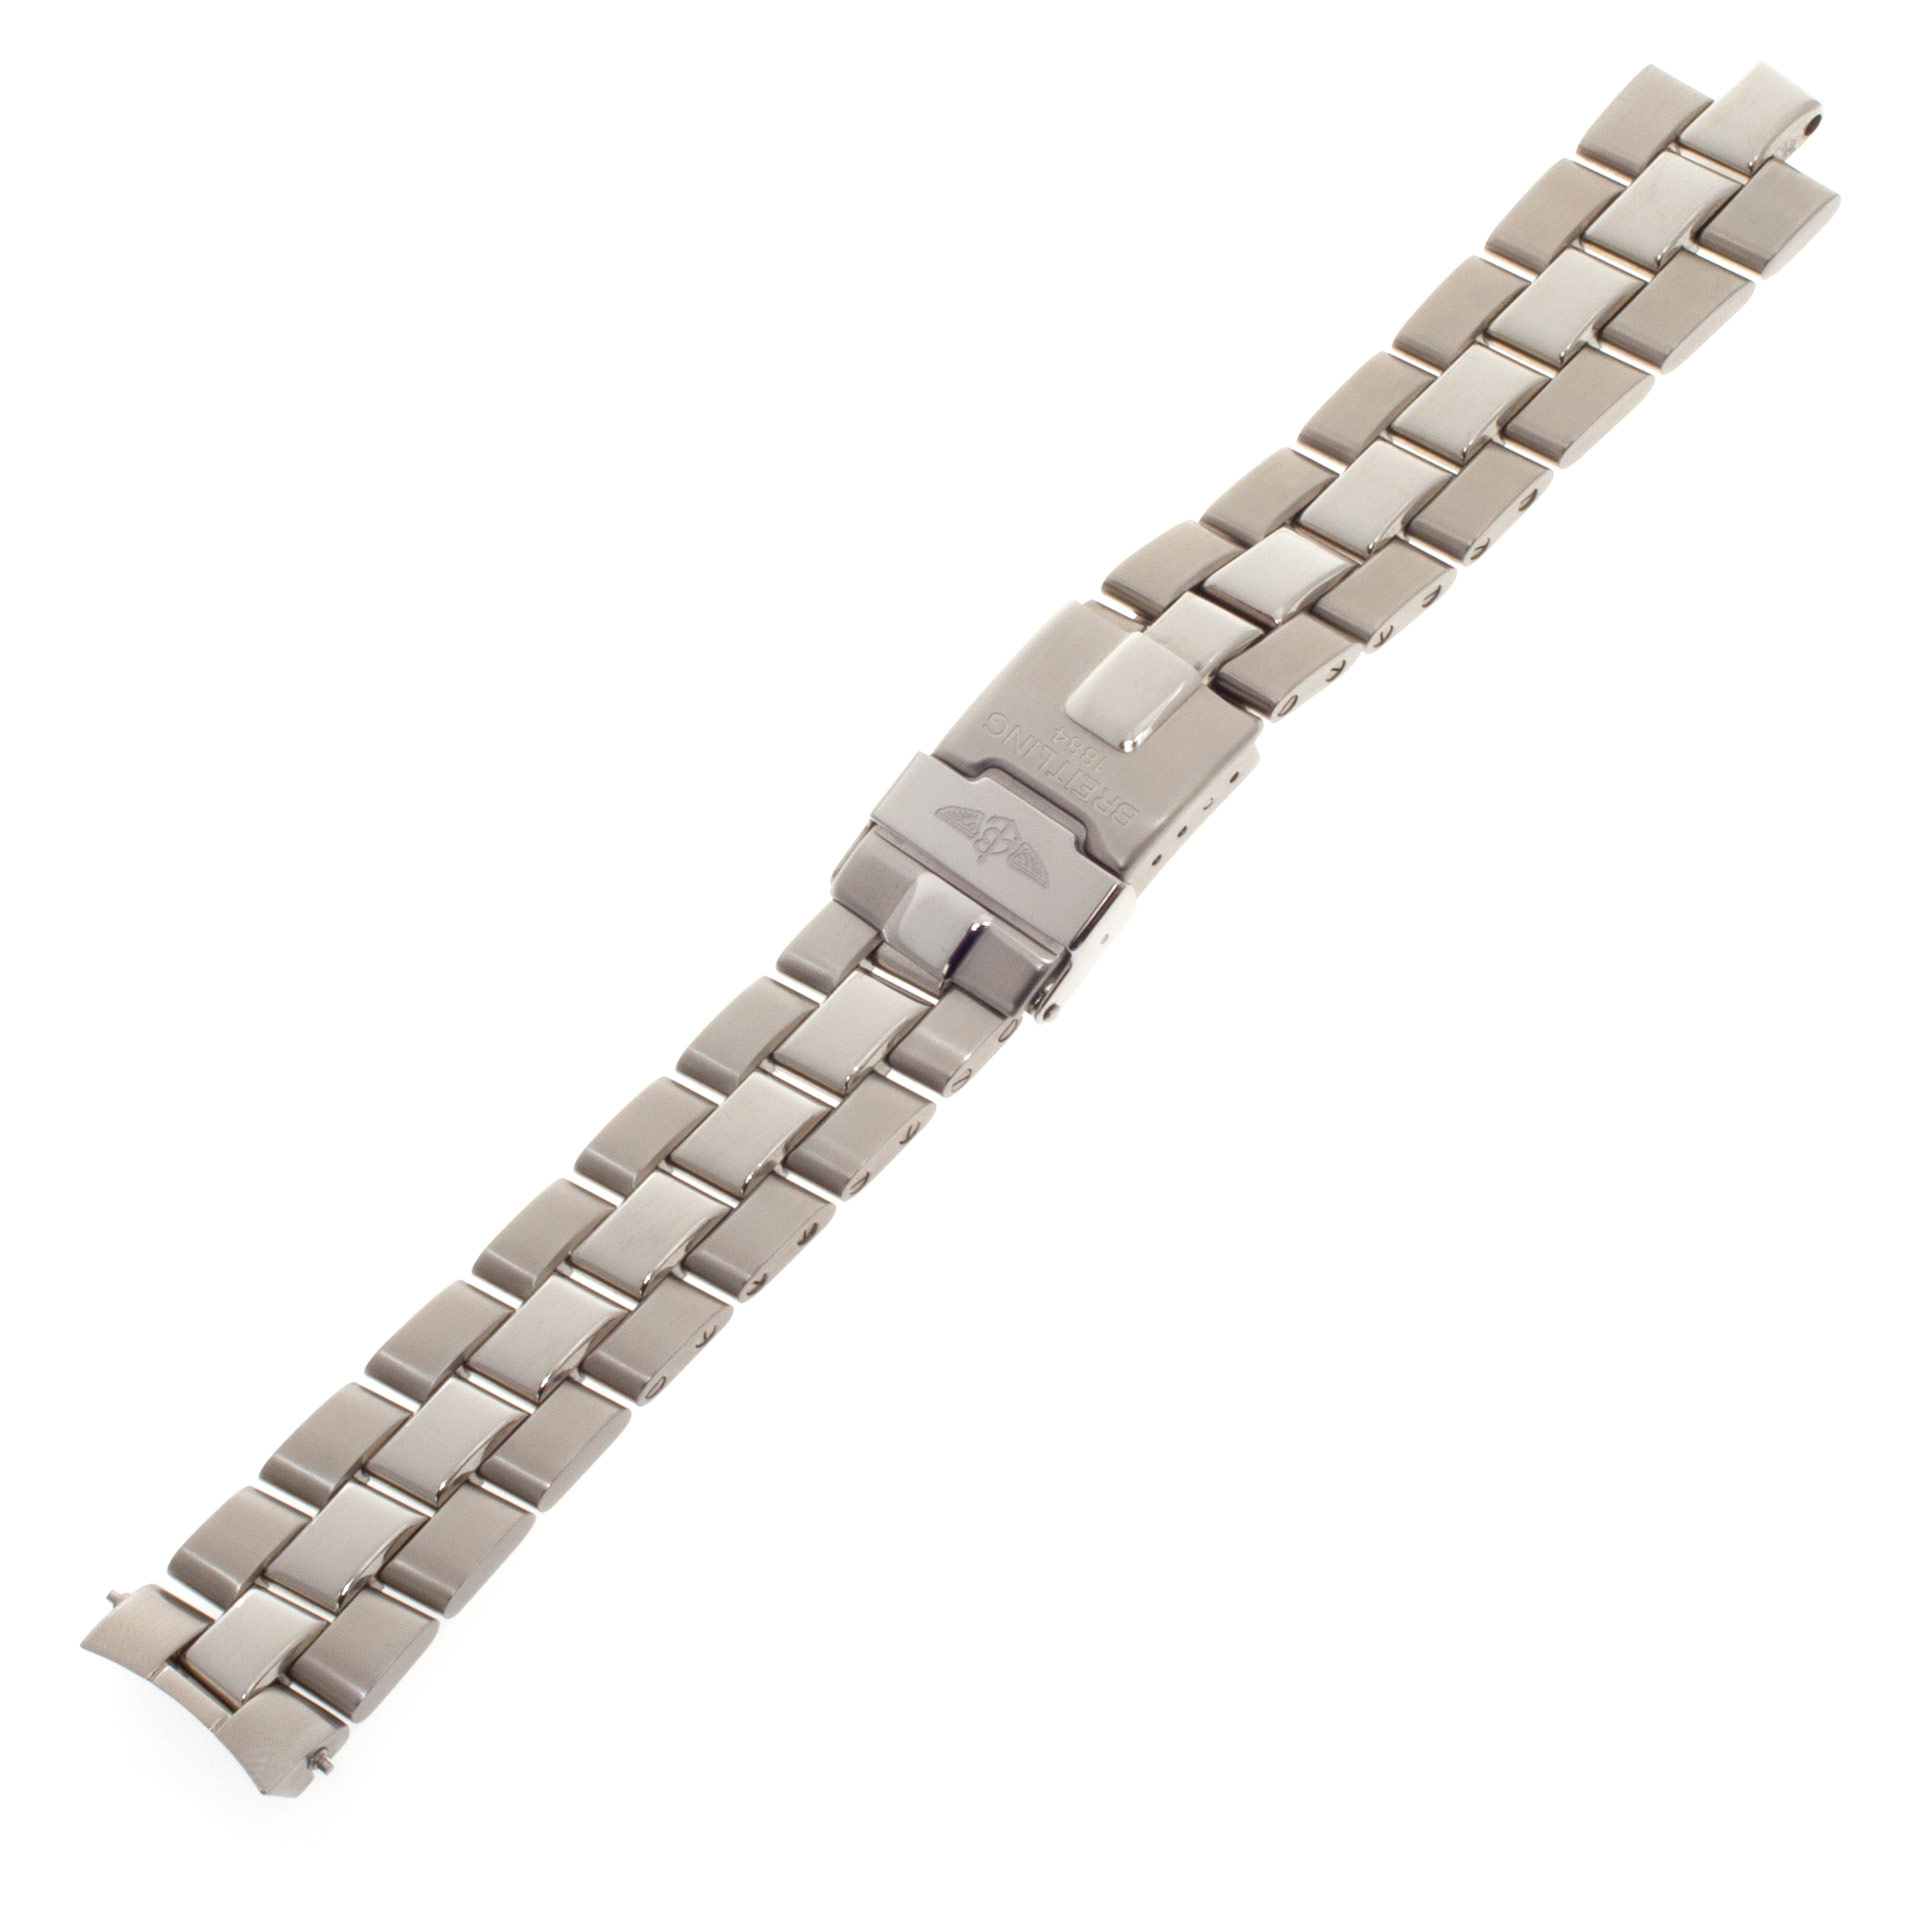 Breitling Fighter stainless steel band with deployant clasp (18mm)